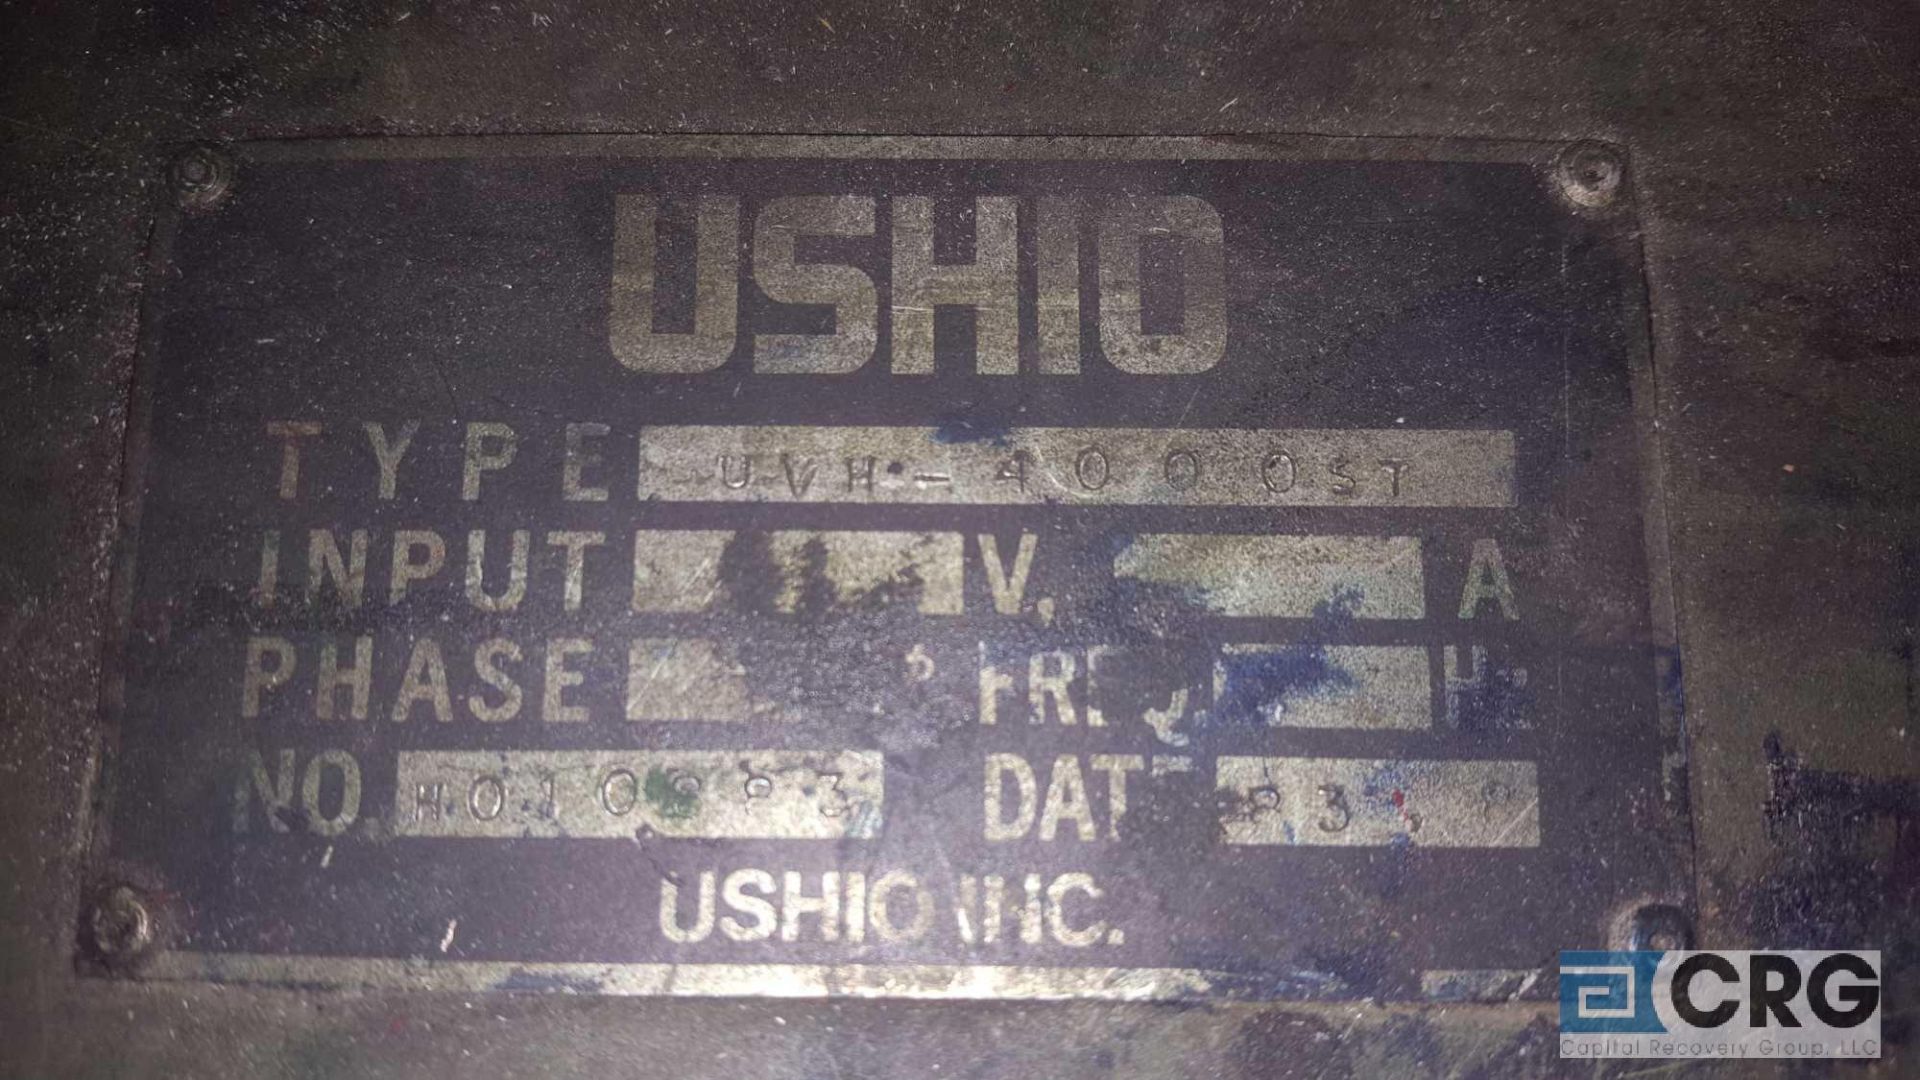 Ushio ultra violet light control unit, type UVH-4000ST, serial number HO10283 - Image 5 of 5